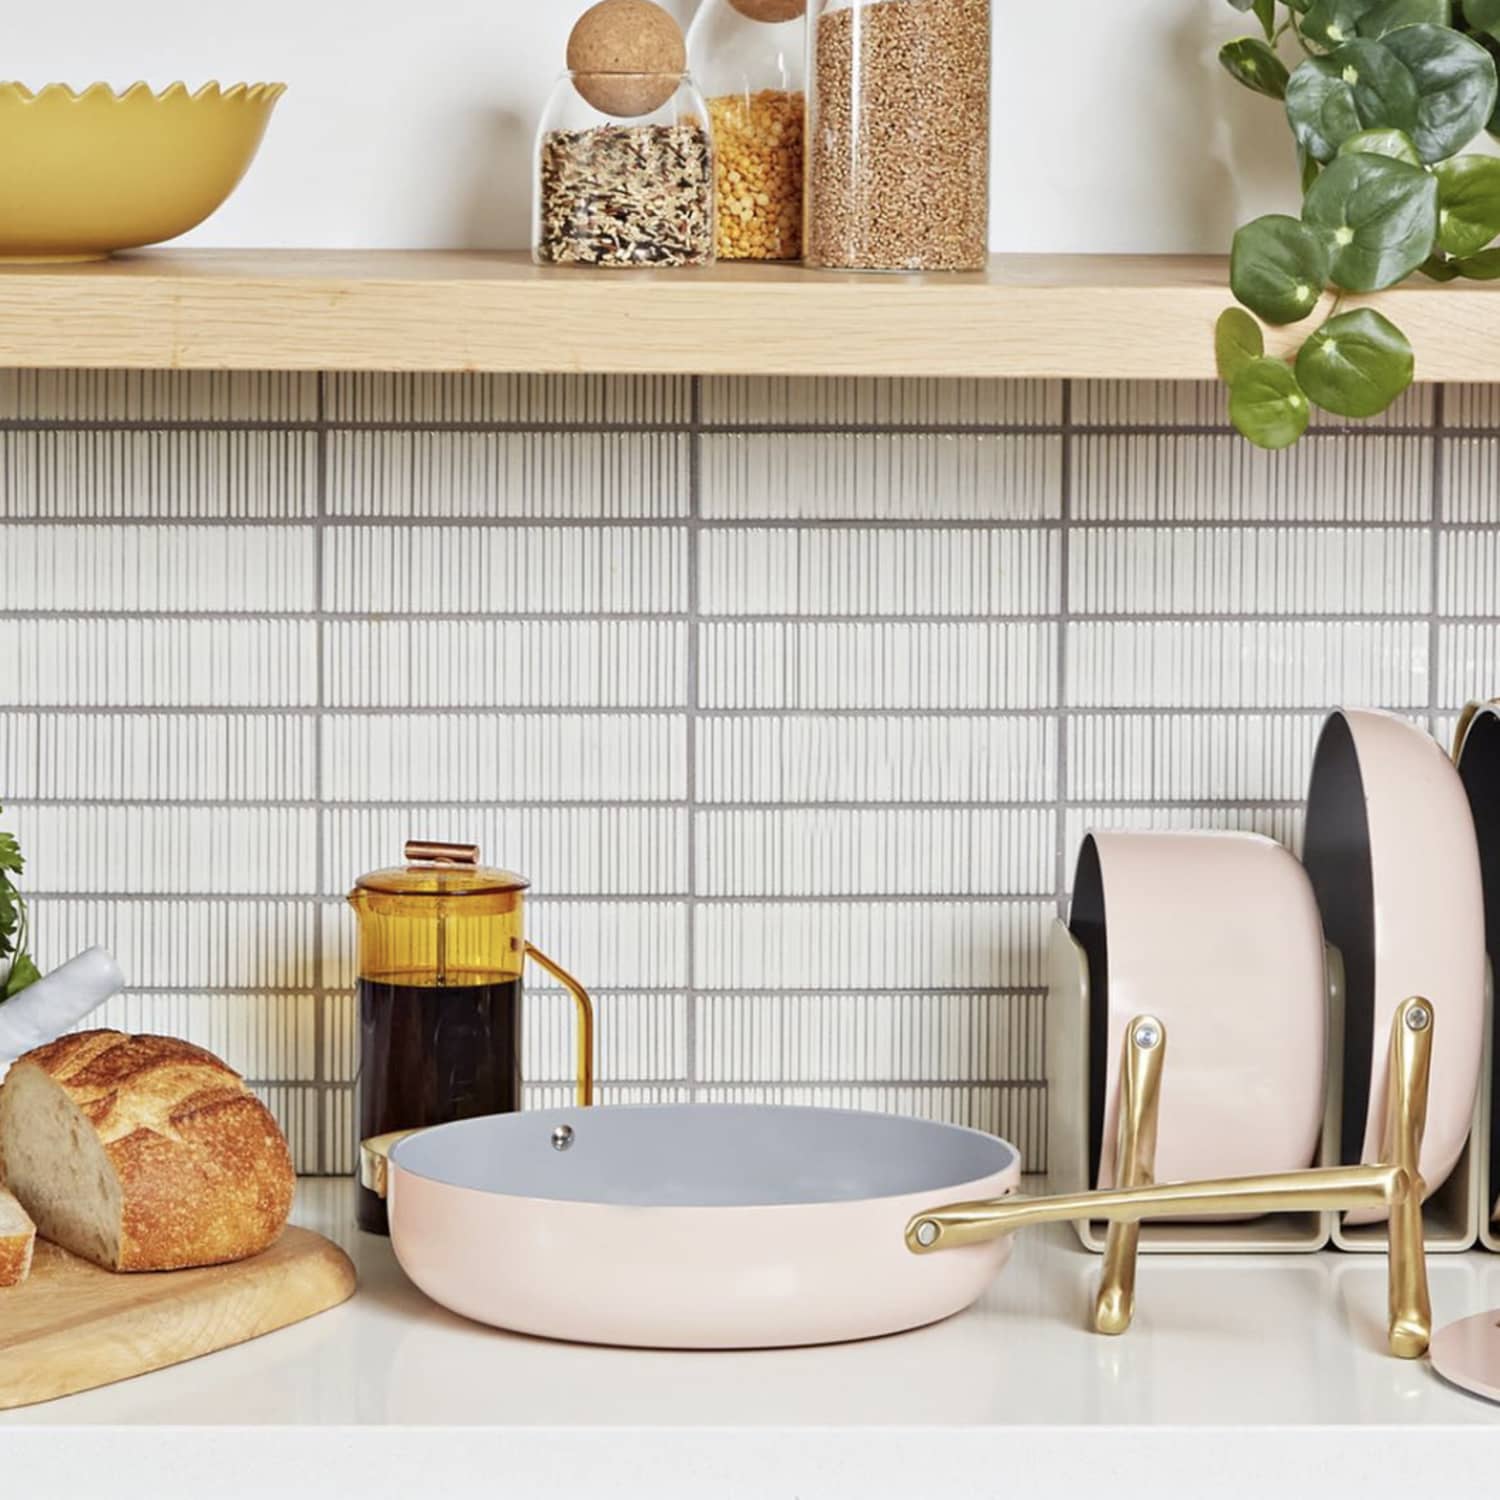 Your Cookware Will Get a Pastel Touch With Caraway's New Full Bloom  Collection